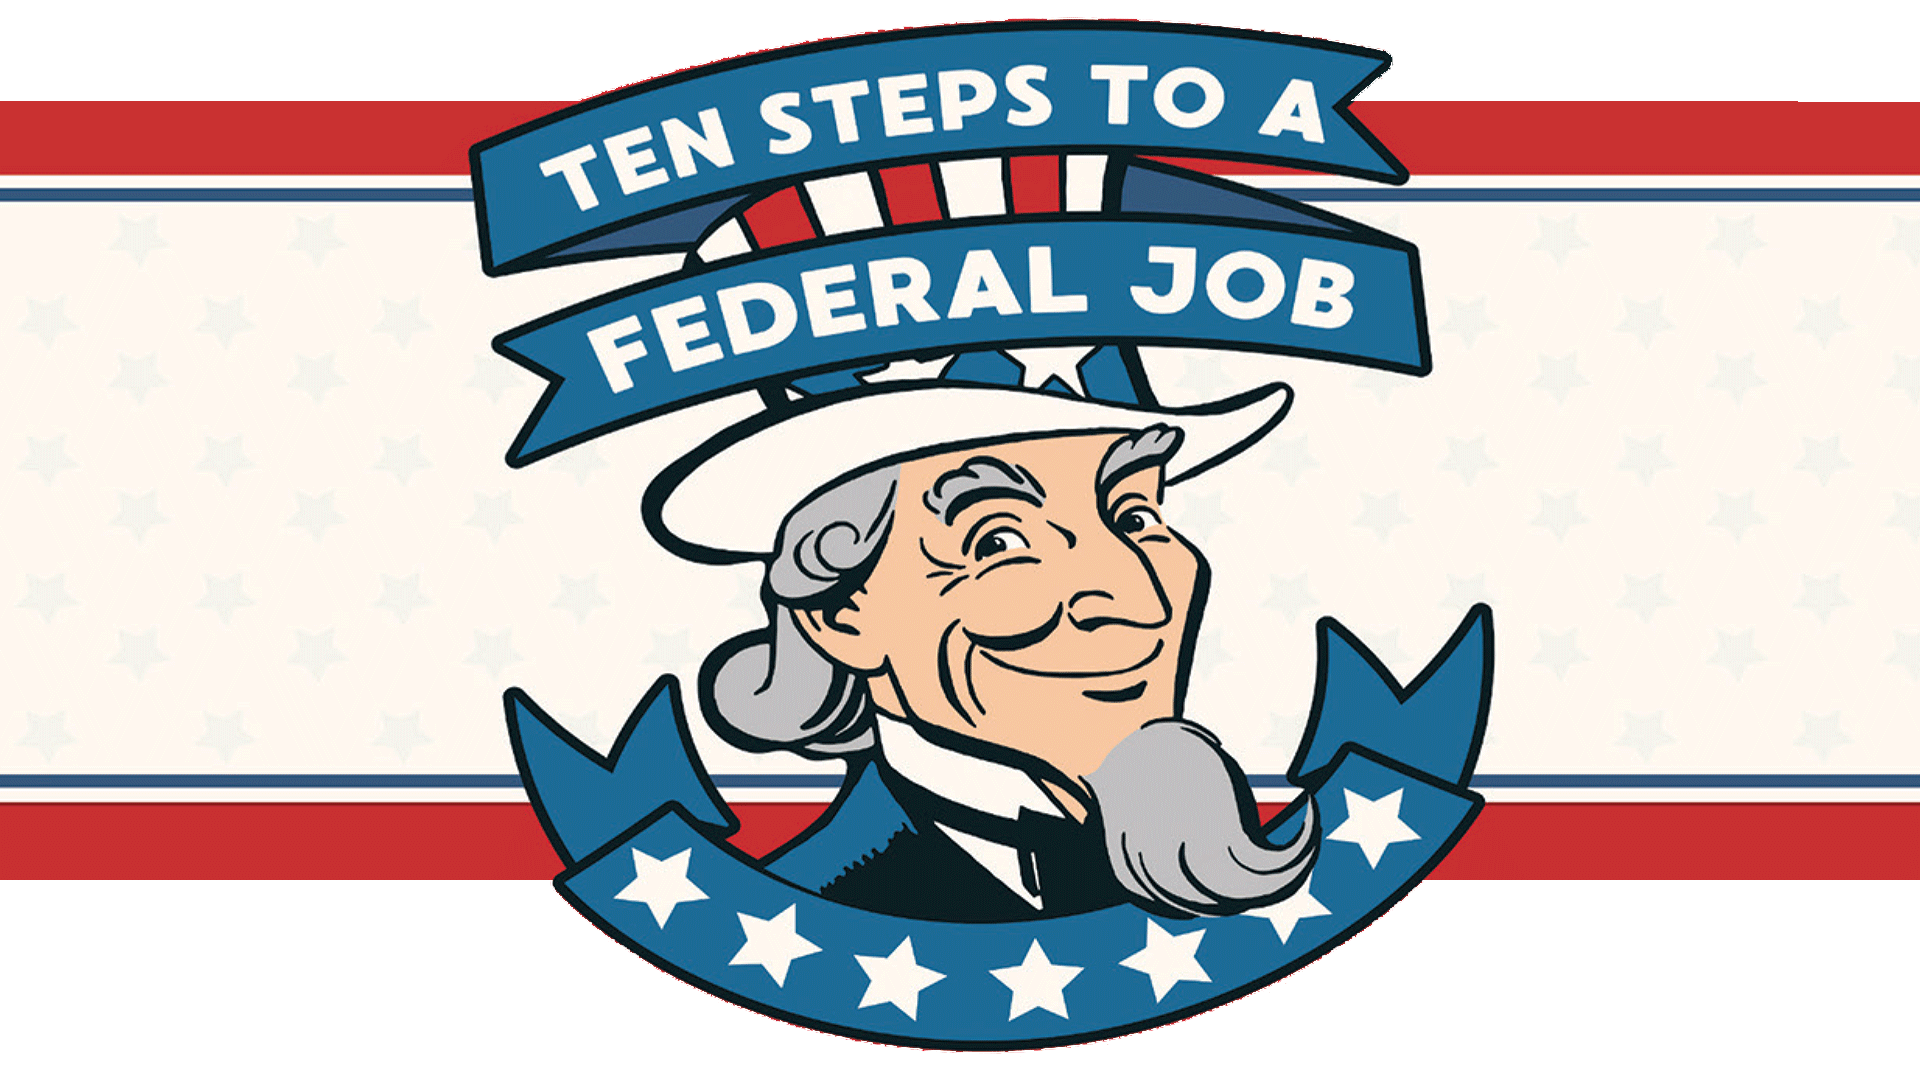 Image of Uncle Sam with title 10 steps to a Federal Job around him.